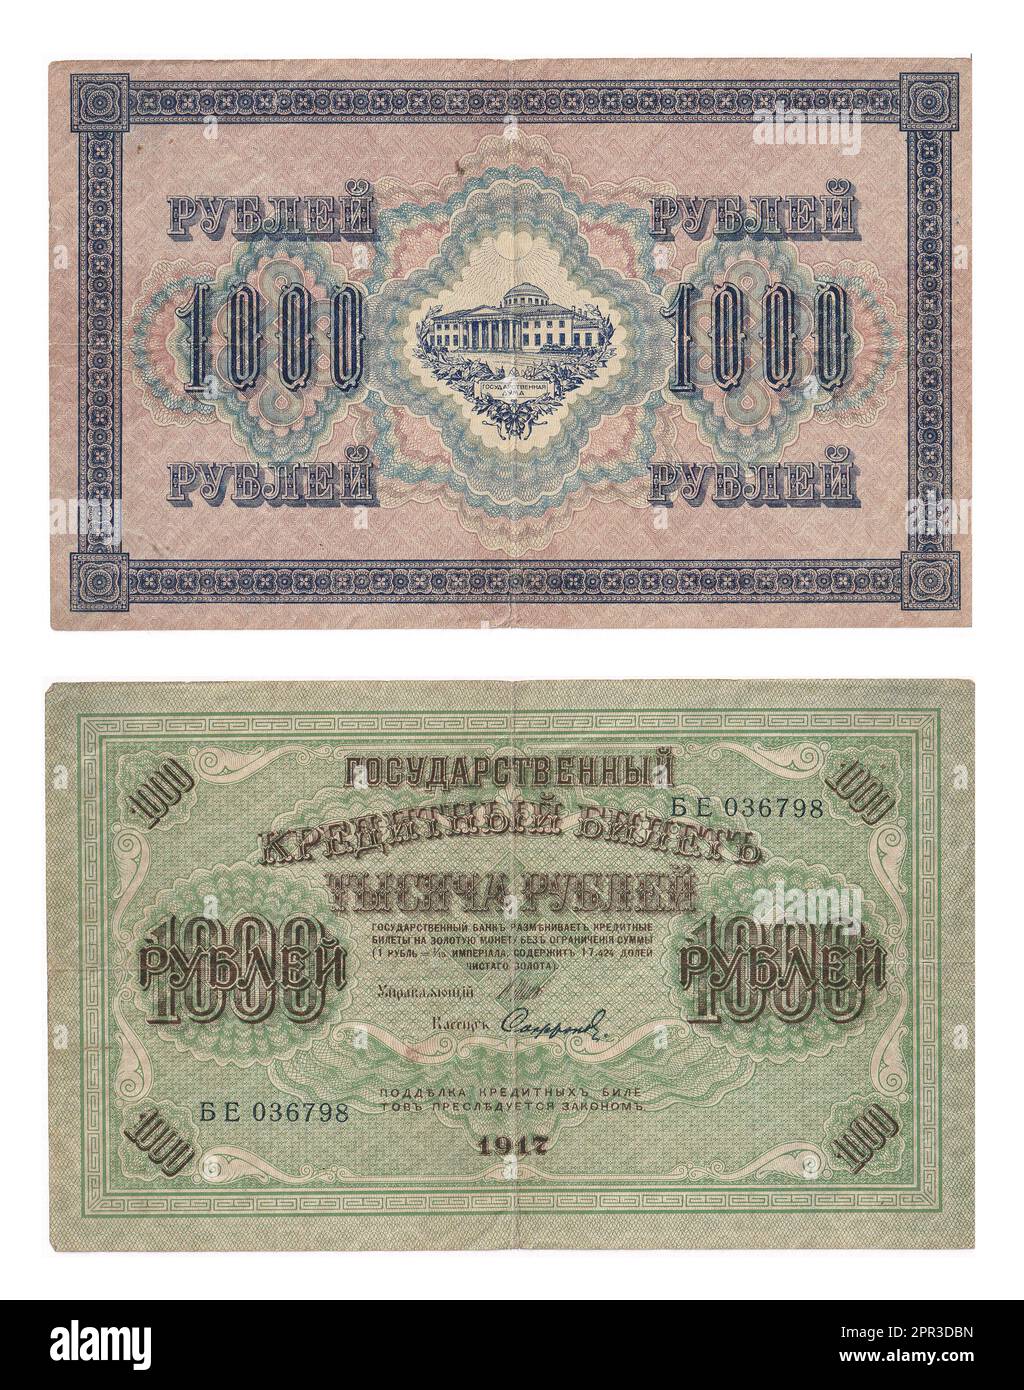 Paper money from Tsar Russia. Photo of old banknotes from Russia. Stock Photo